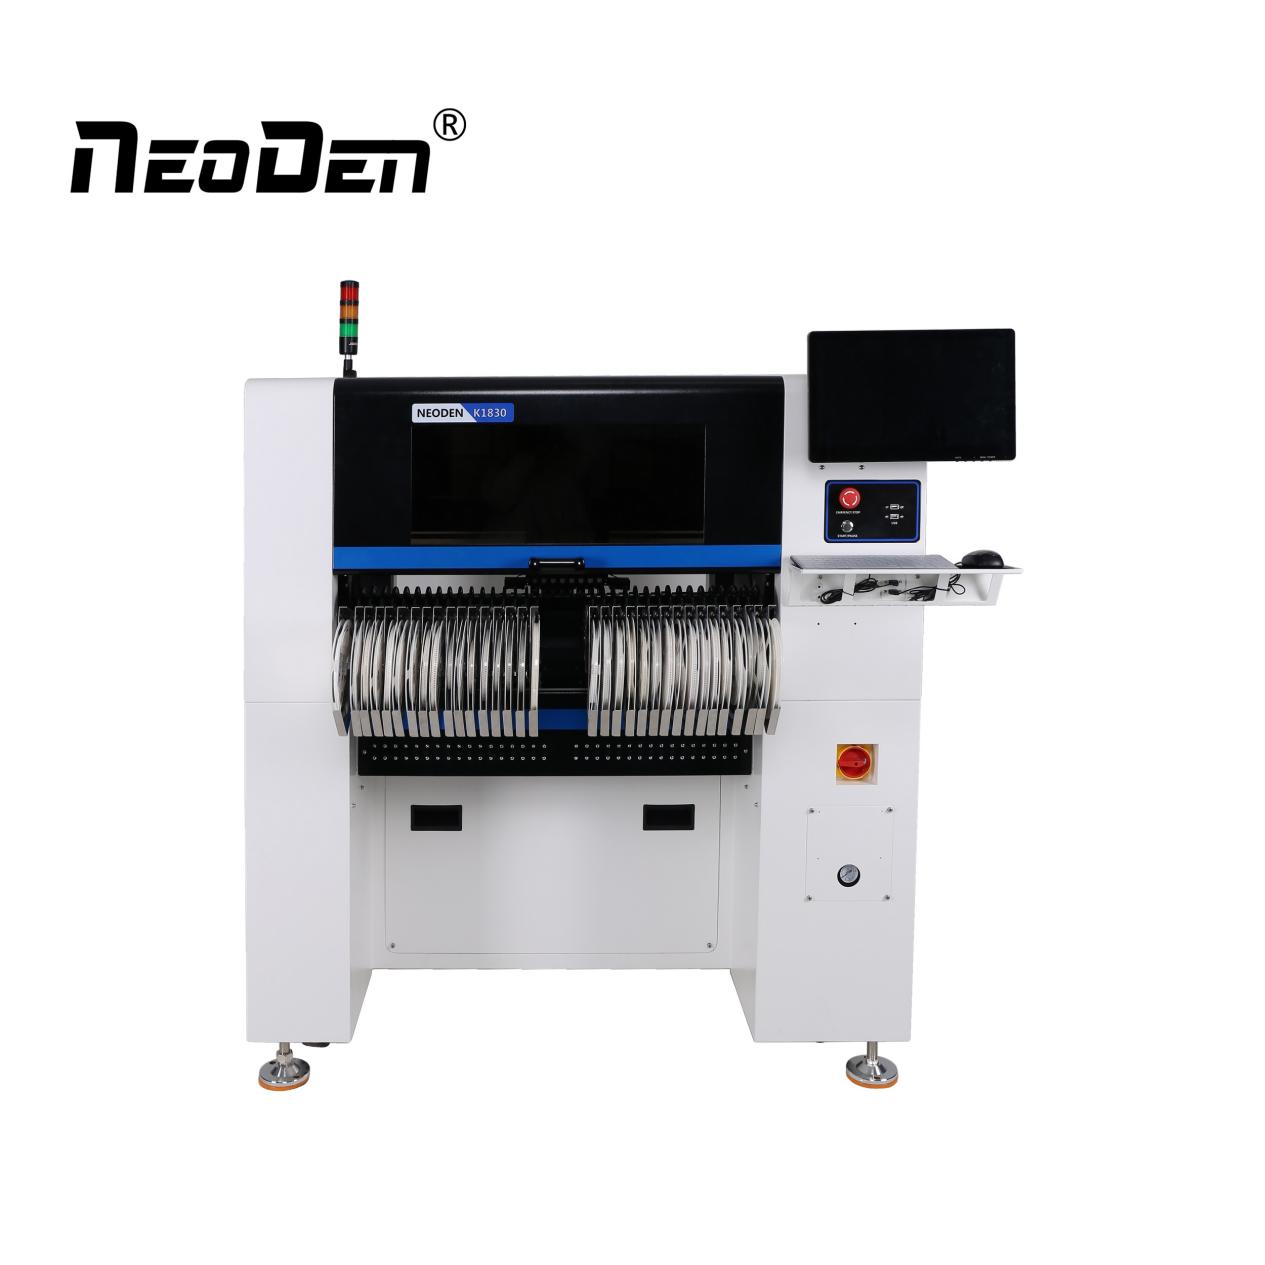 How to improve the productivity of smt machine?